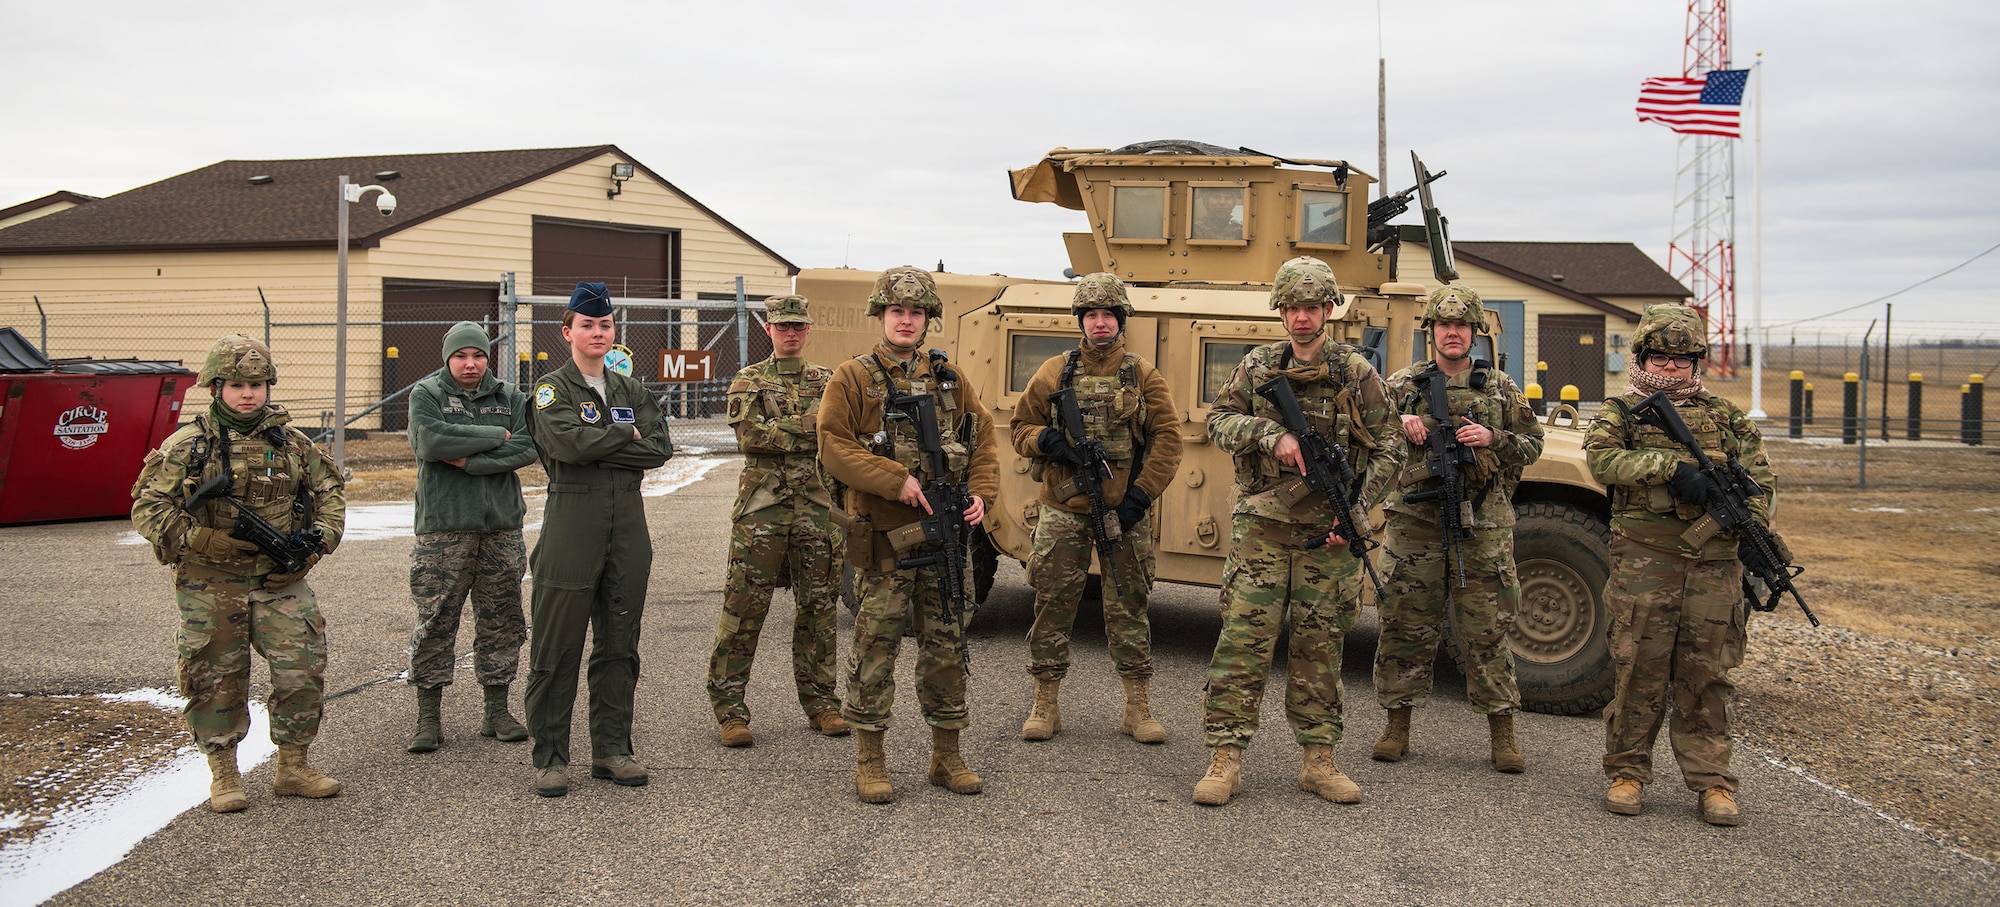 All-Female Alert Airmen from Minot Air Force Base pose in front of a High Mobility Multipurpose Wheeled Vehicle at a Missile Alert facility near Minot, North Dakota, March 12, 2020. The Airmen took part in an all-female alert crew in observance of Women's History Month. (U.S. Air Force photo by Airman Fist Class Jesse Jenny)